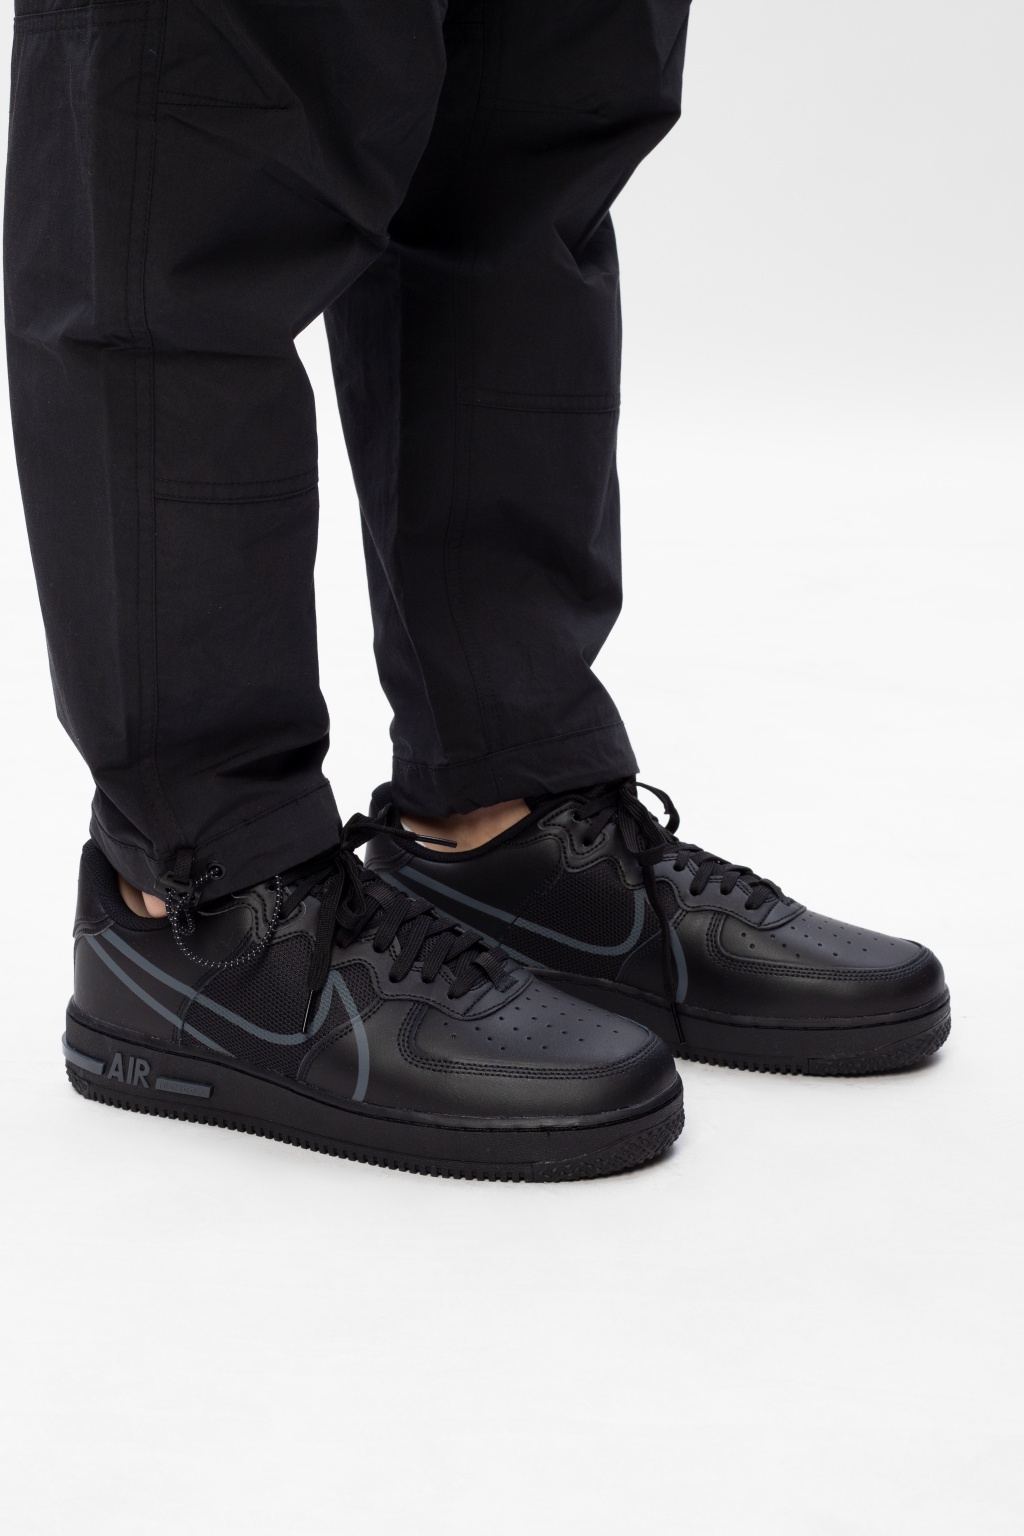 air force 1 react black anthracite